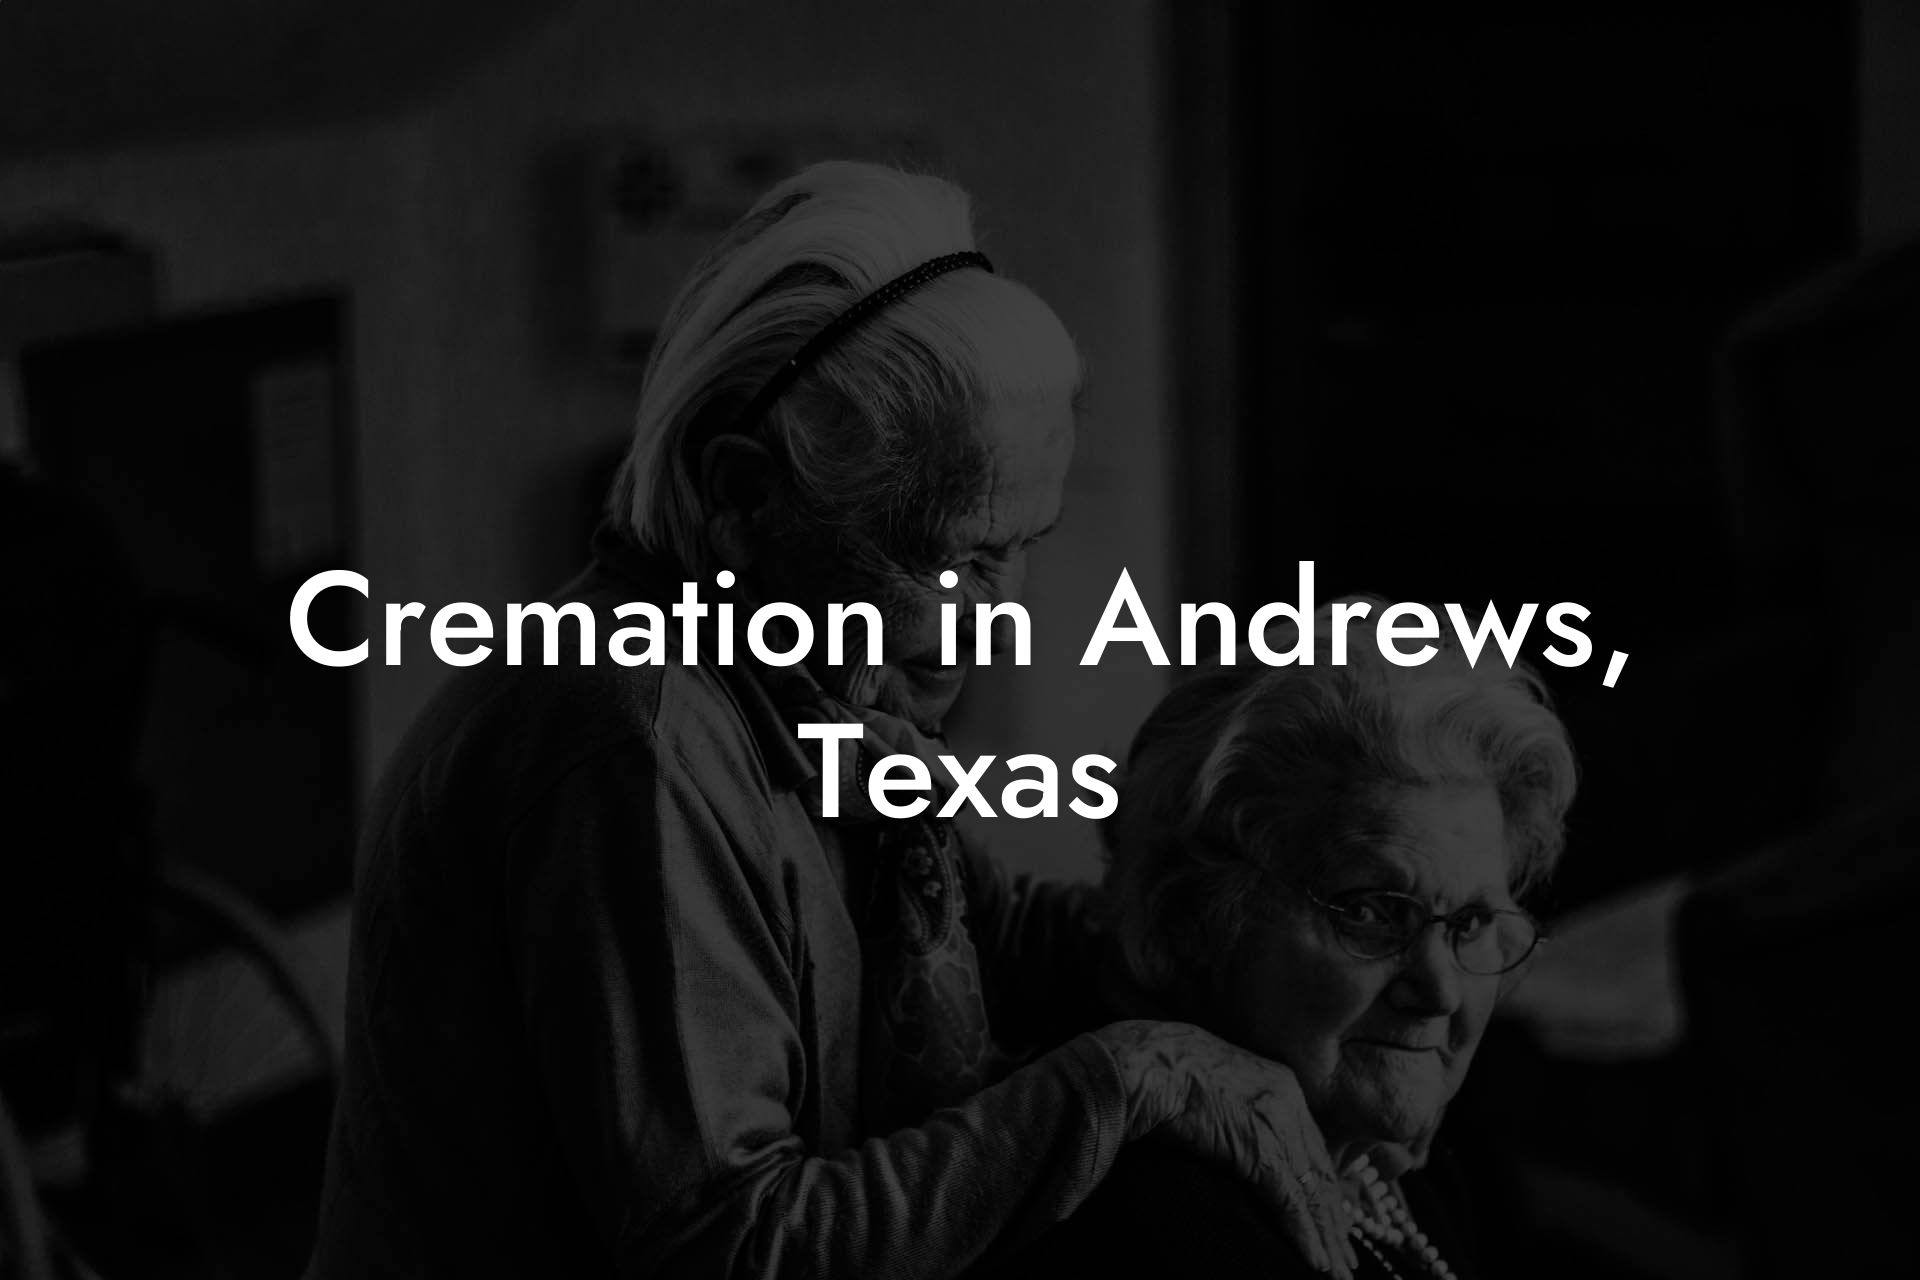 Cremation in Andrews, Texas